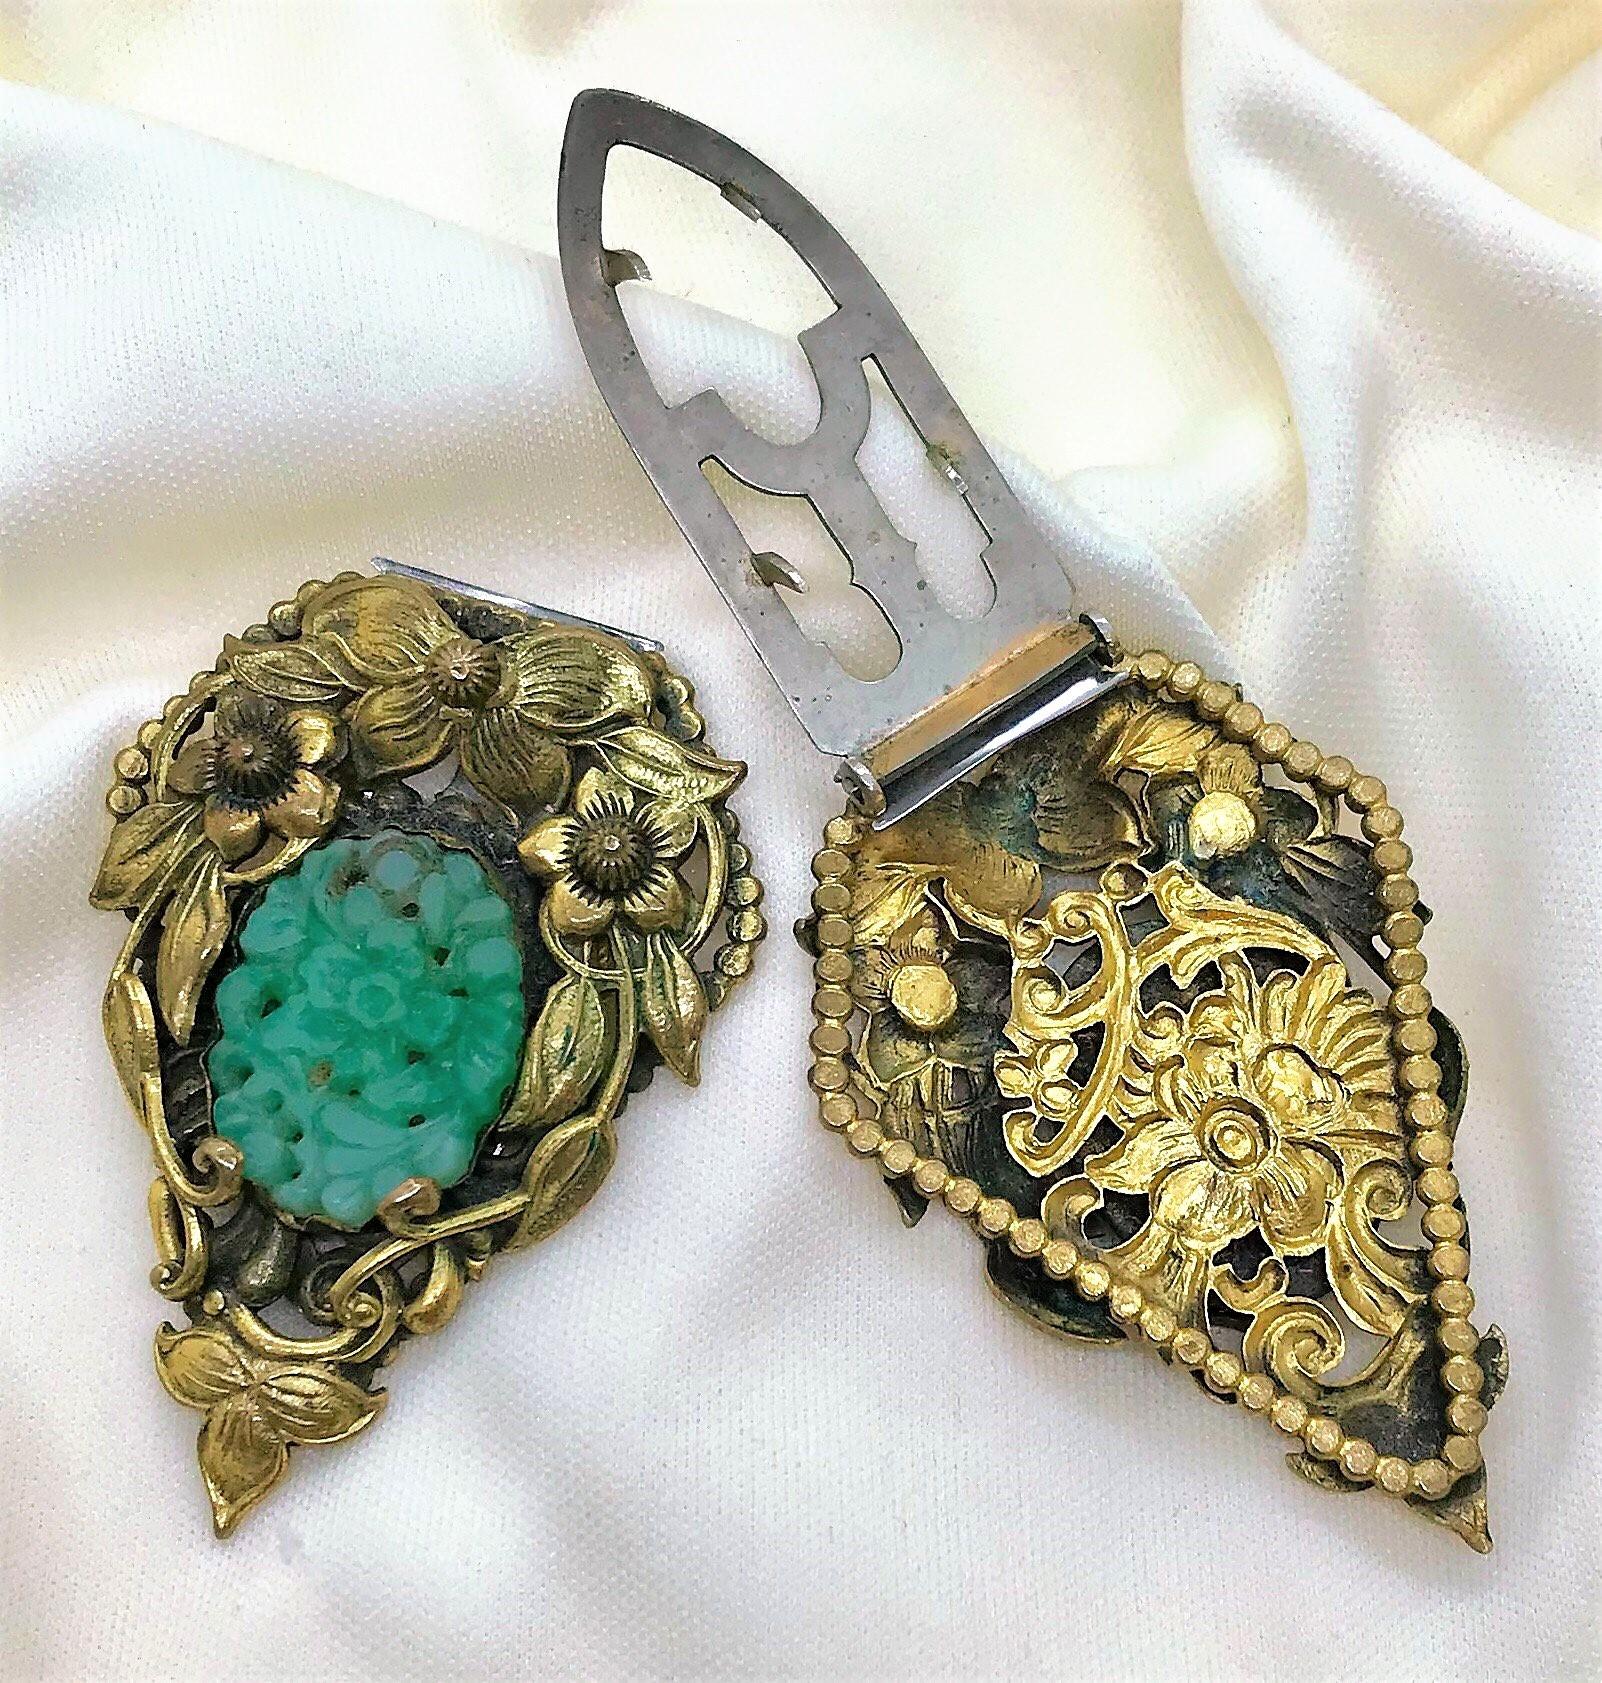 Women's Circa 1930 Goldtone Floral Dress Clips Set With Molded Jade Green Glass, Pair For Sale